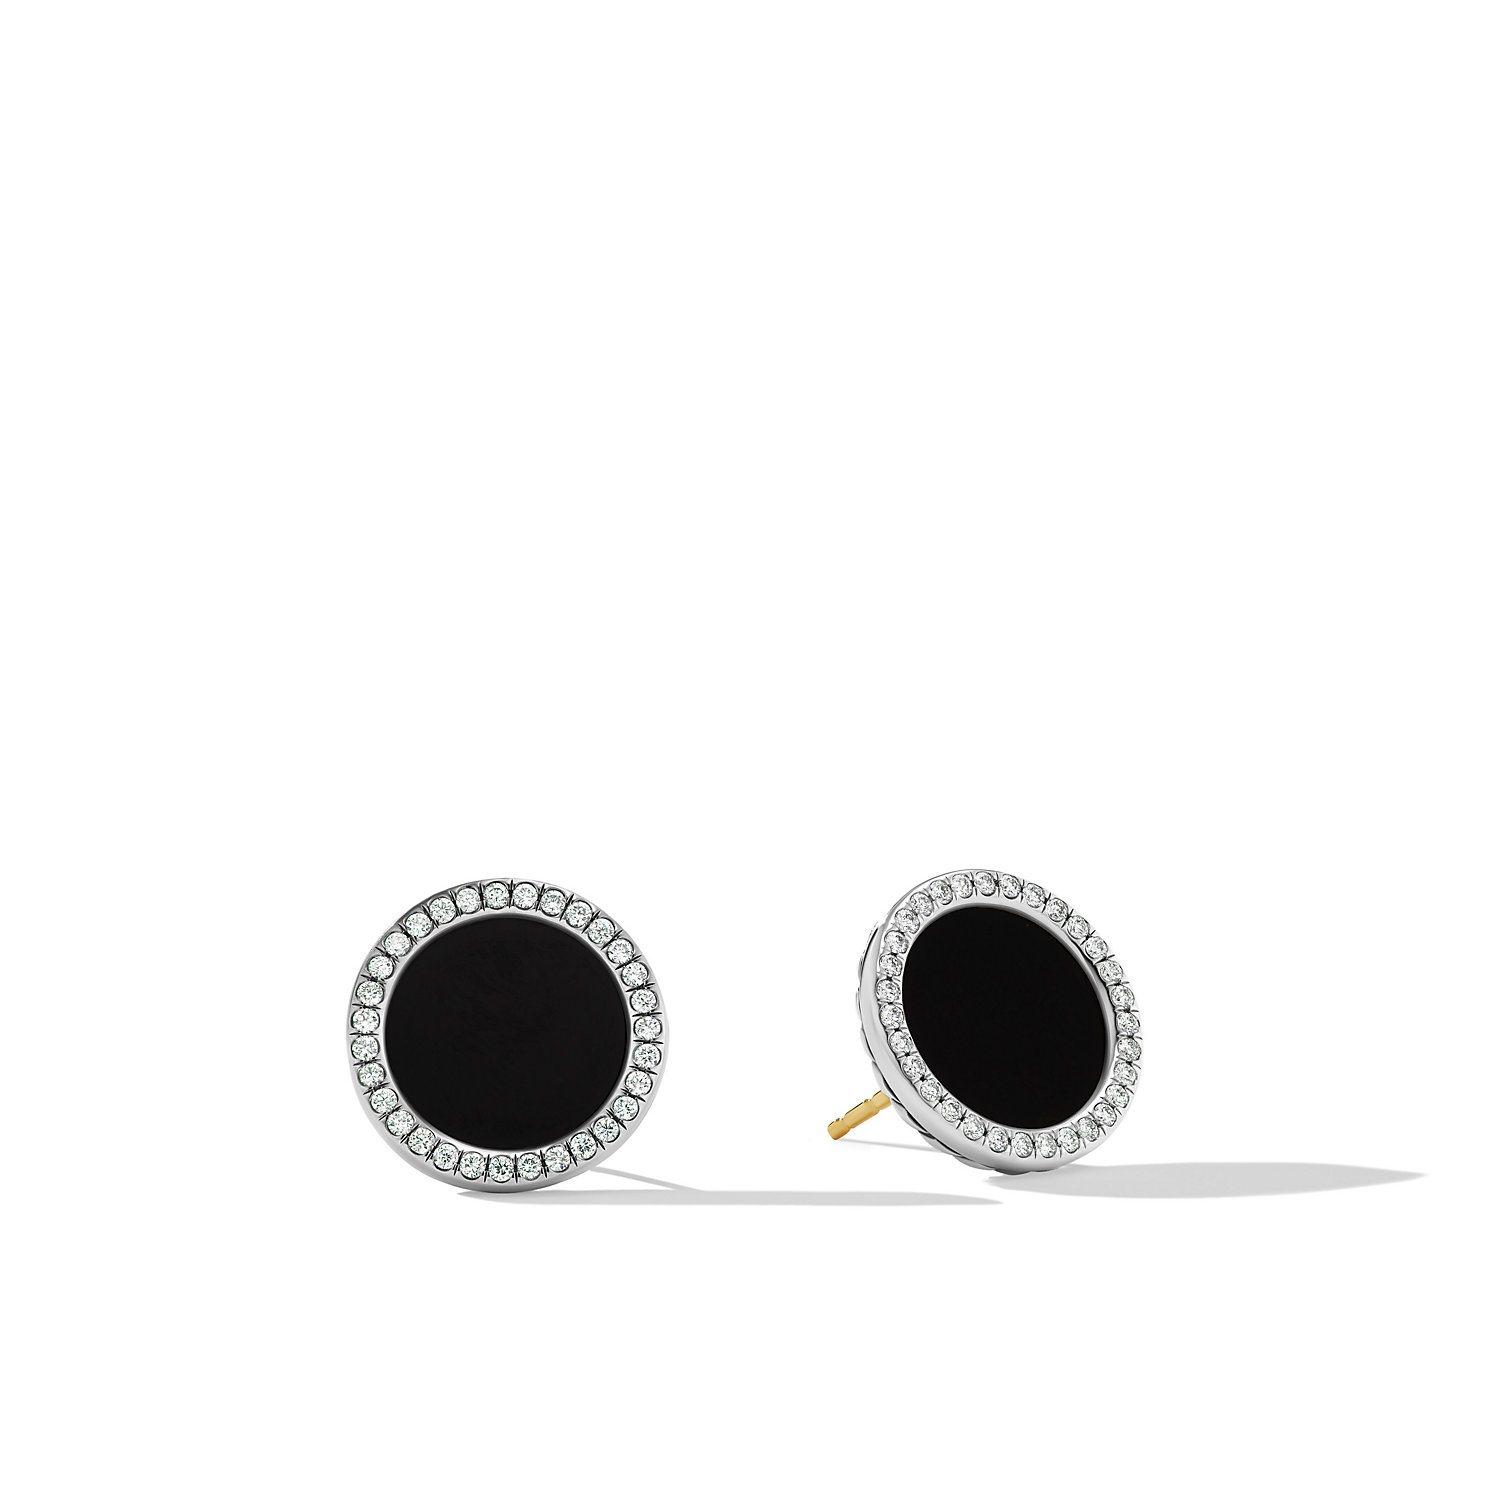 David Yurman DY Elements Button Earrings with Black Onyx and Pave Diamonds